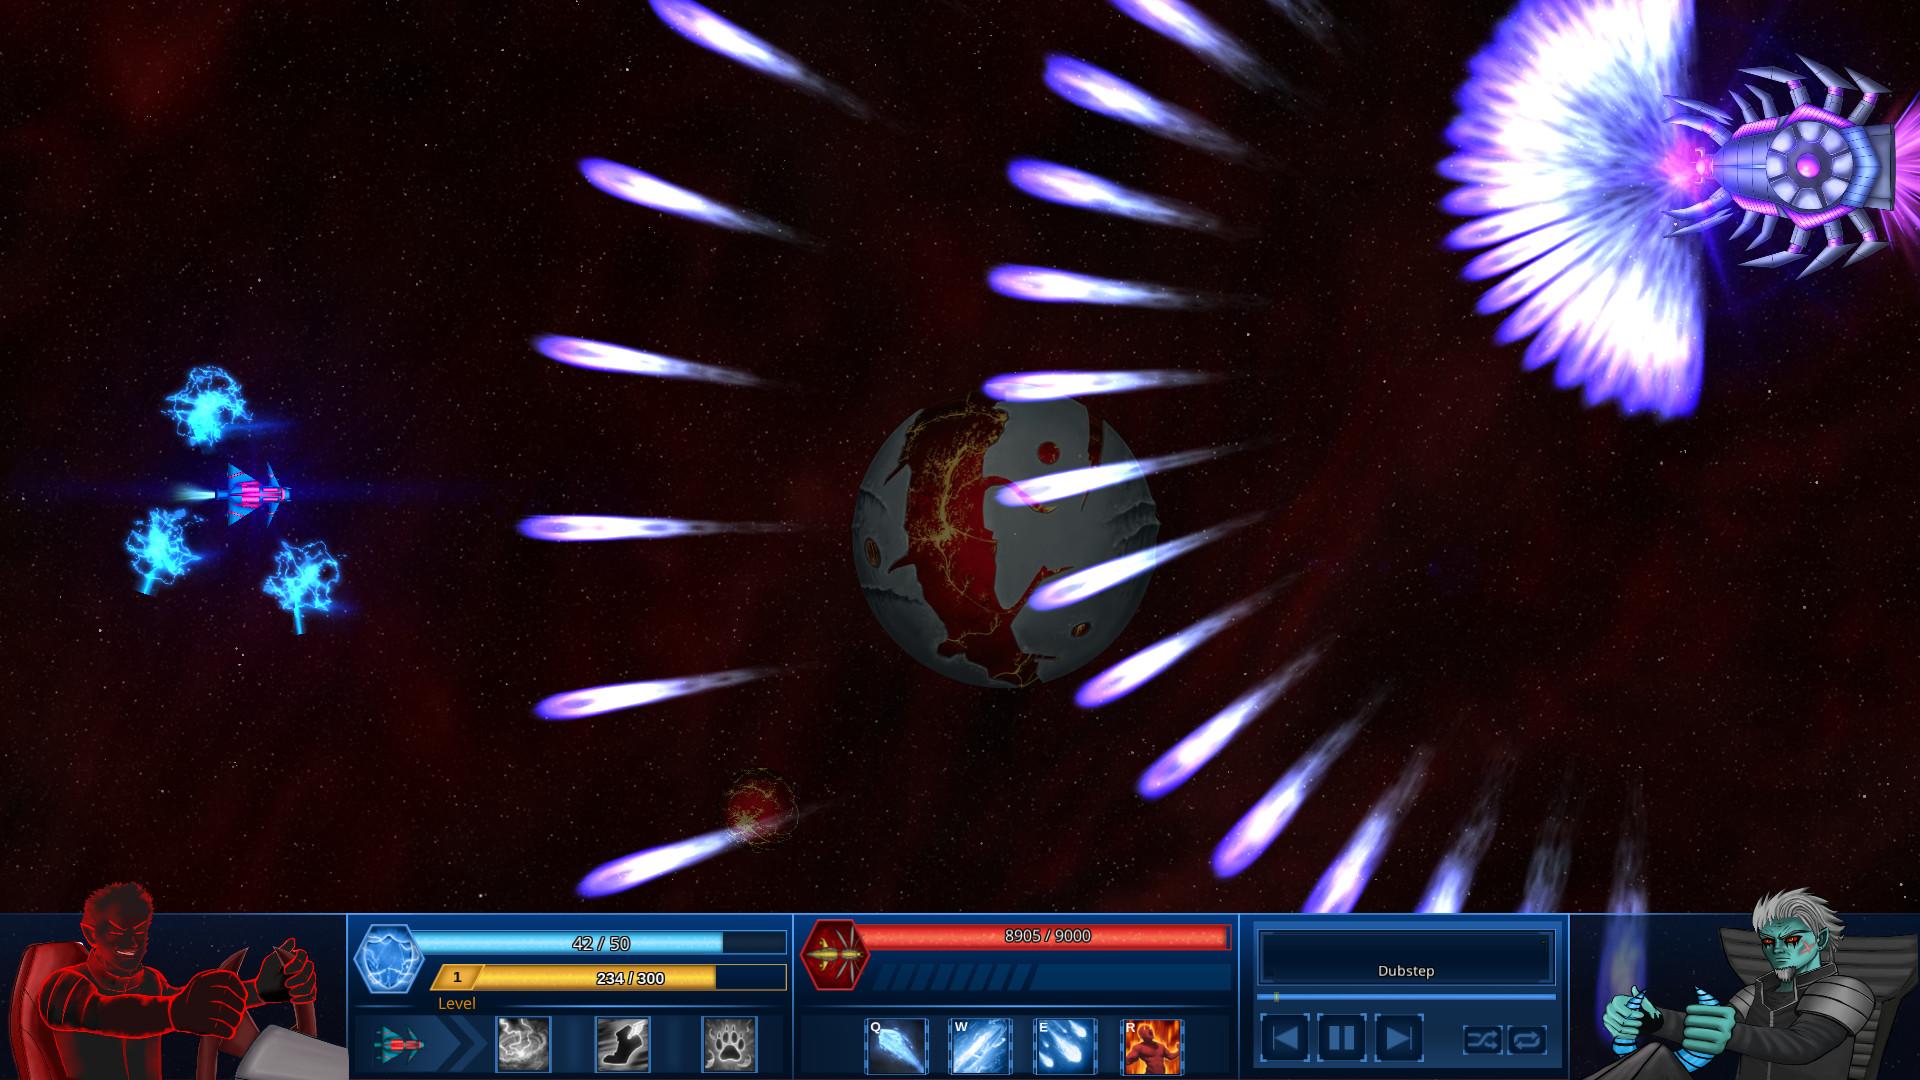 Screenshot №2 from game Survive in Space